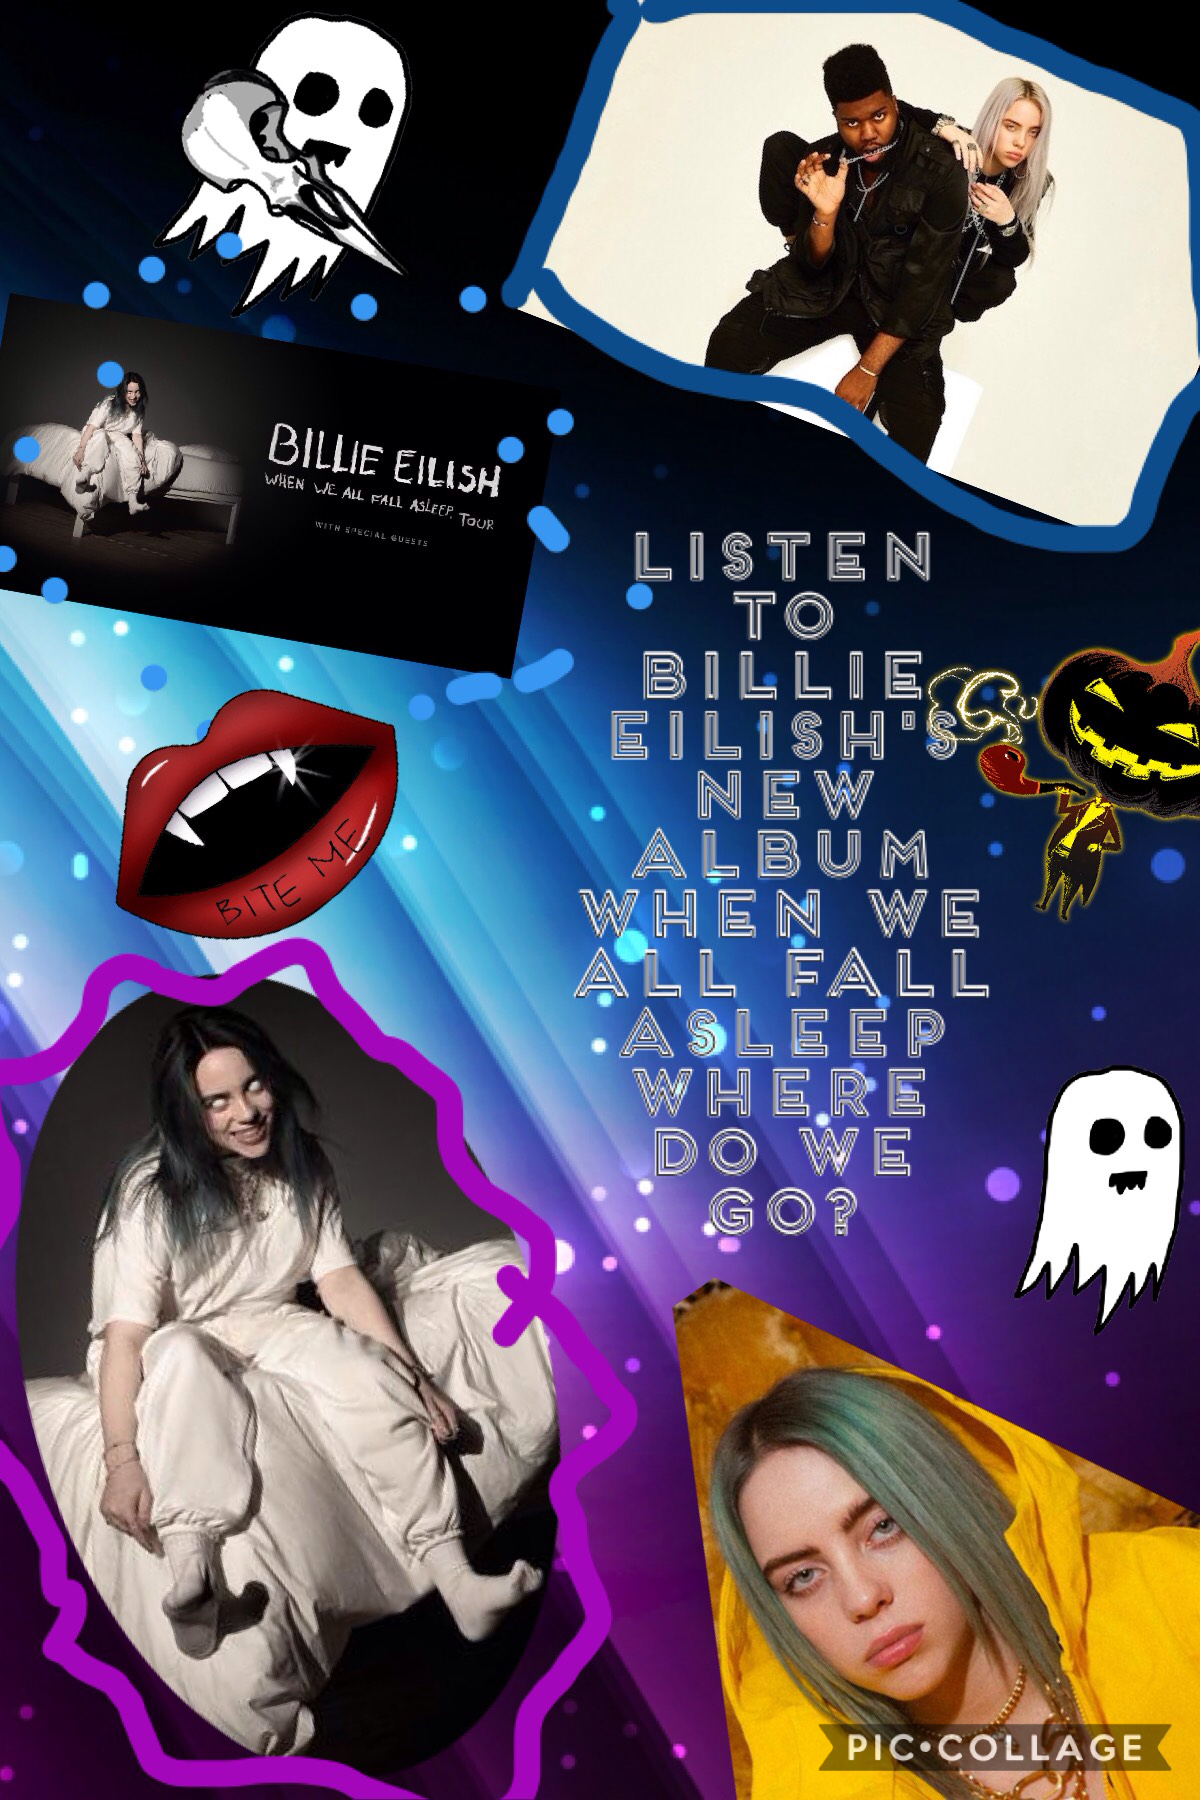 This was supposed to be animated but it it didn't work. Anyways, listen to the newest album by Billie Eilish: When We All Fall Asleep, Where Do We Go?